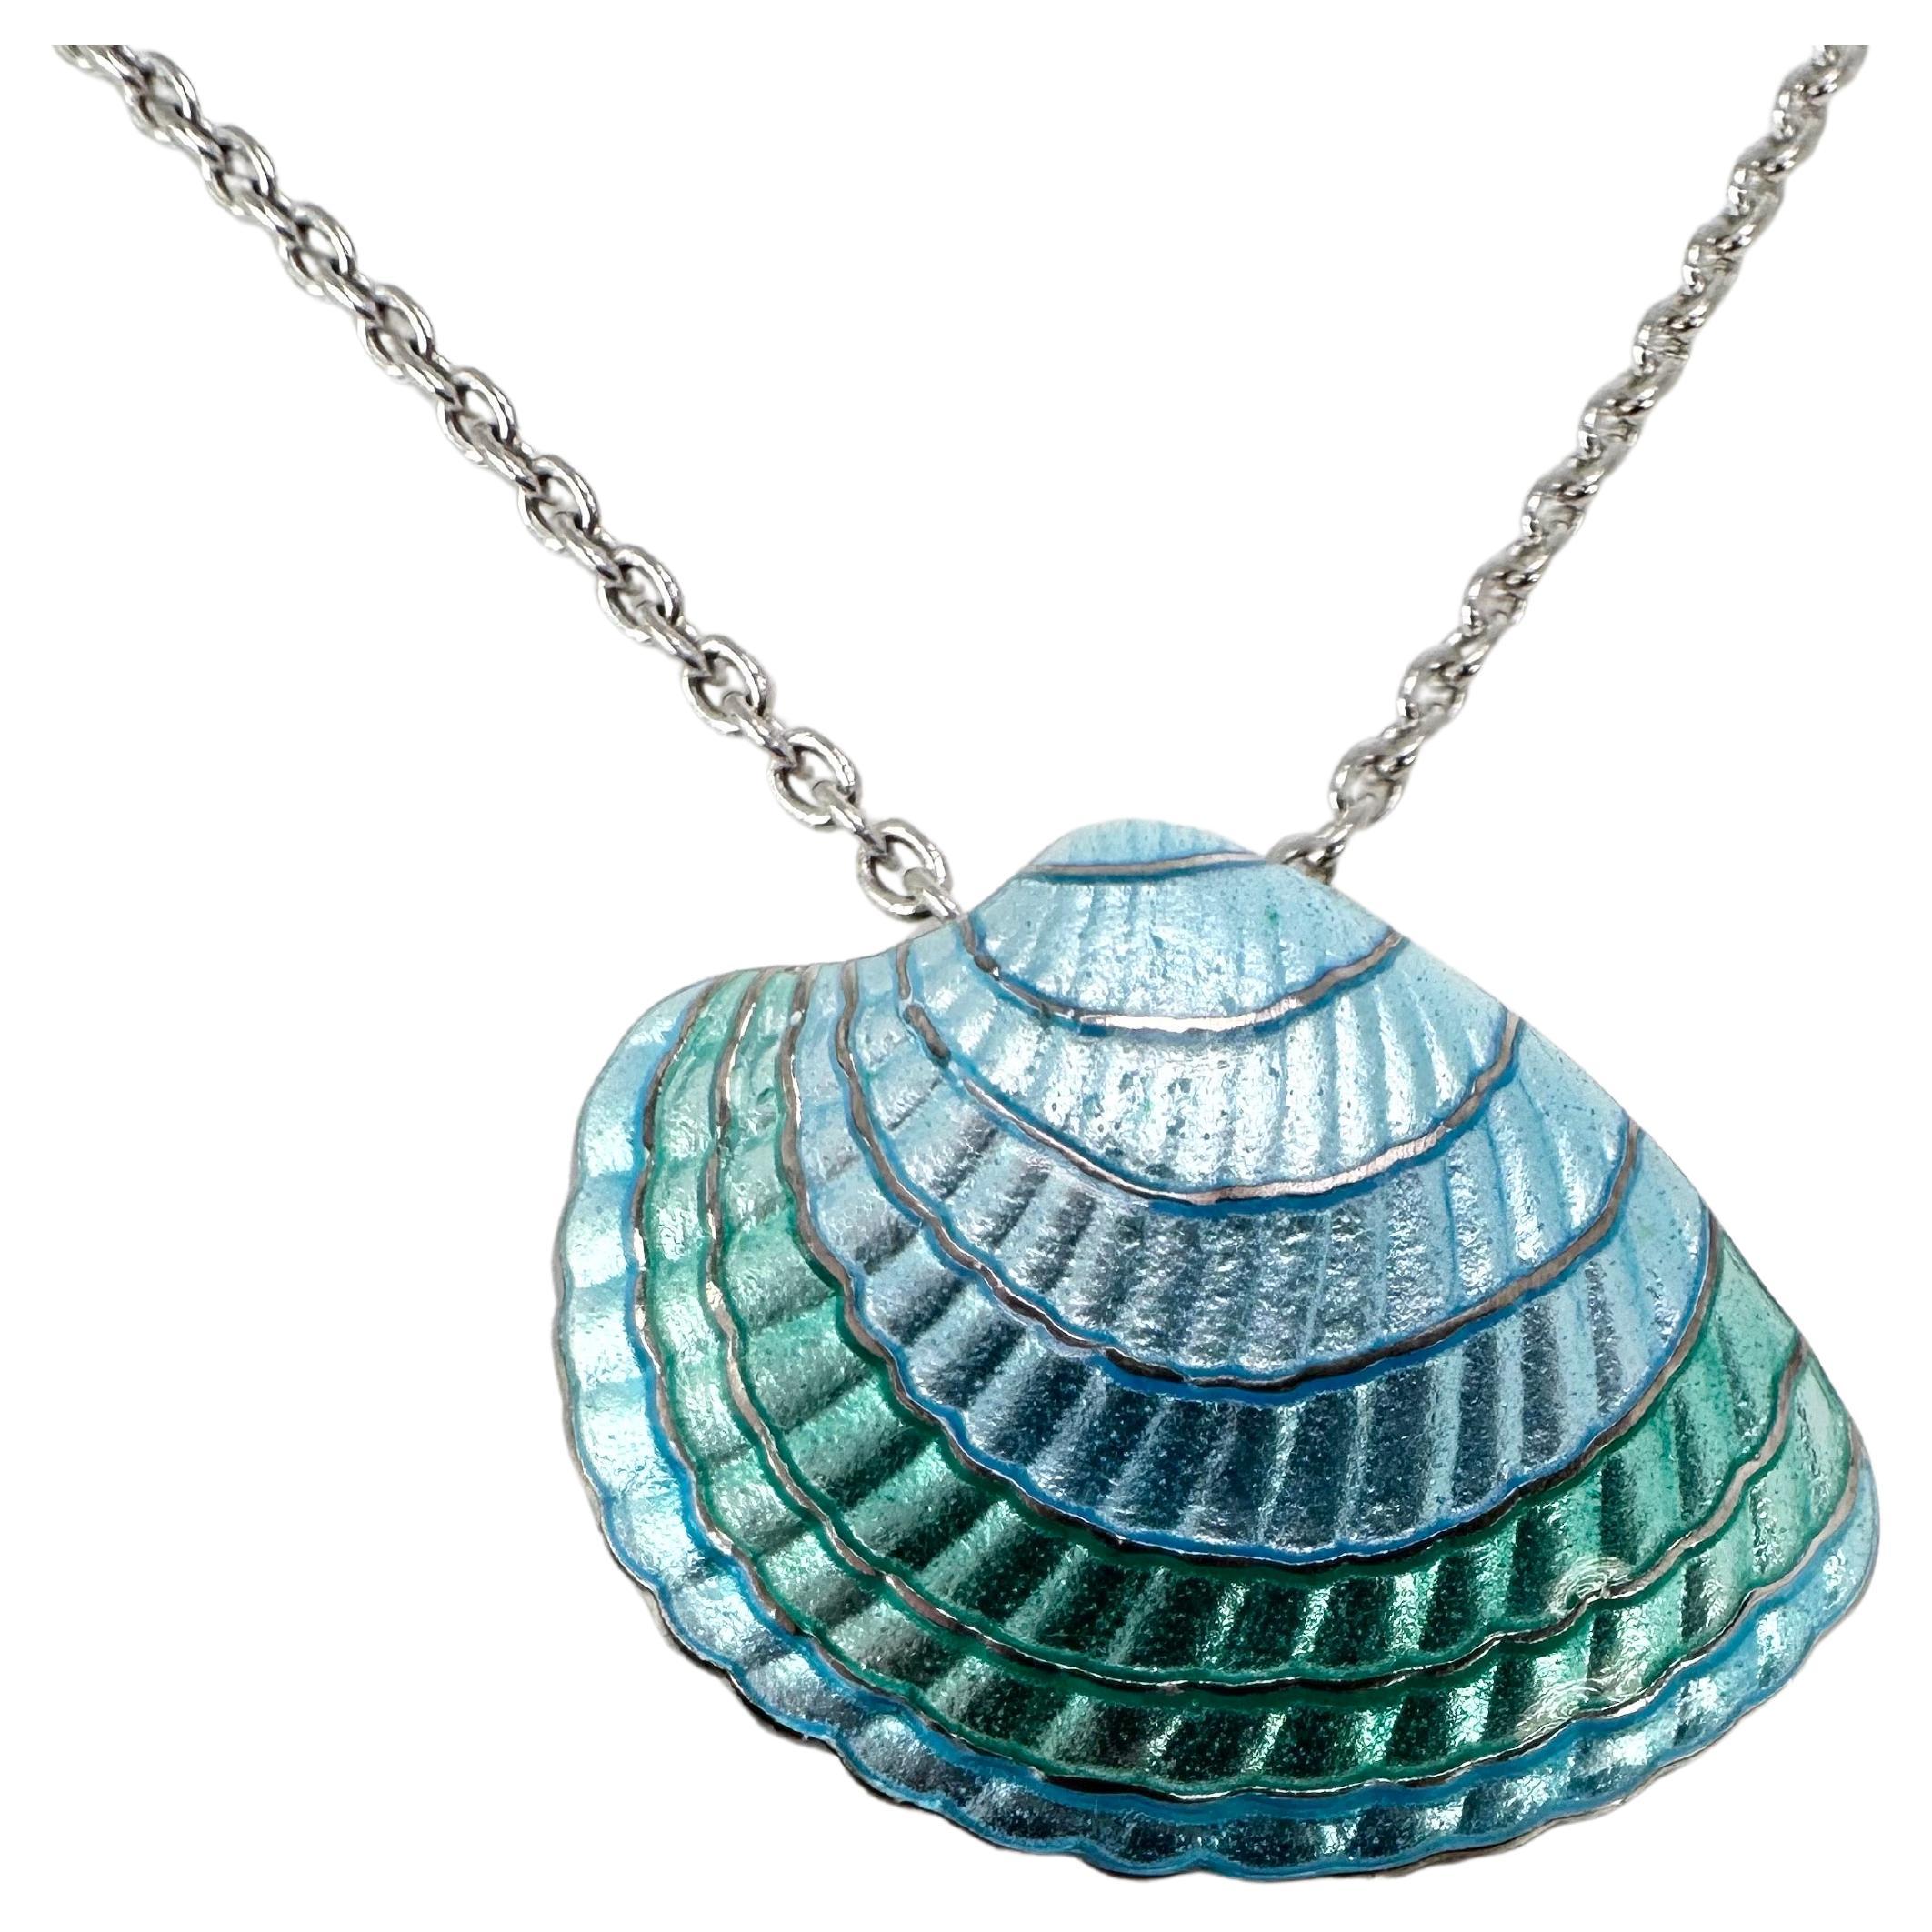 Shell pendant necklace 925 ss silver pendant necklace sea For Sale